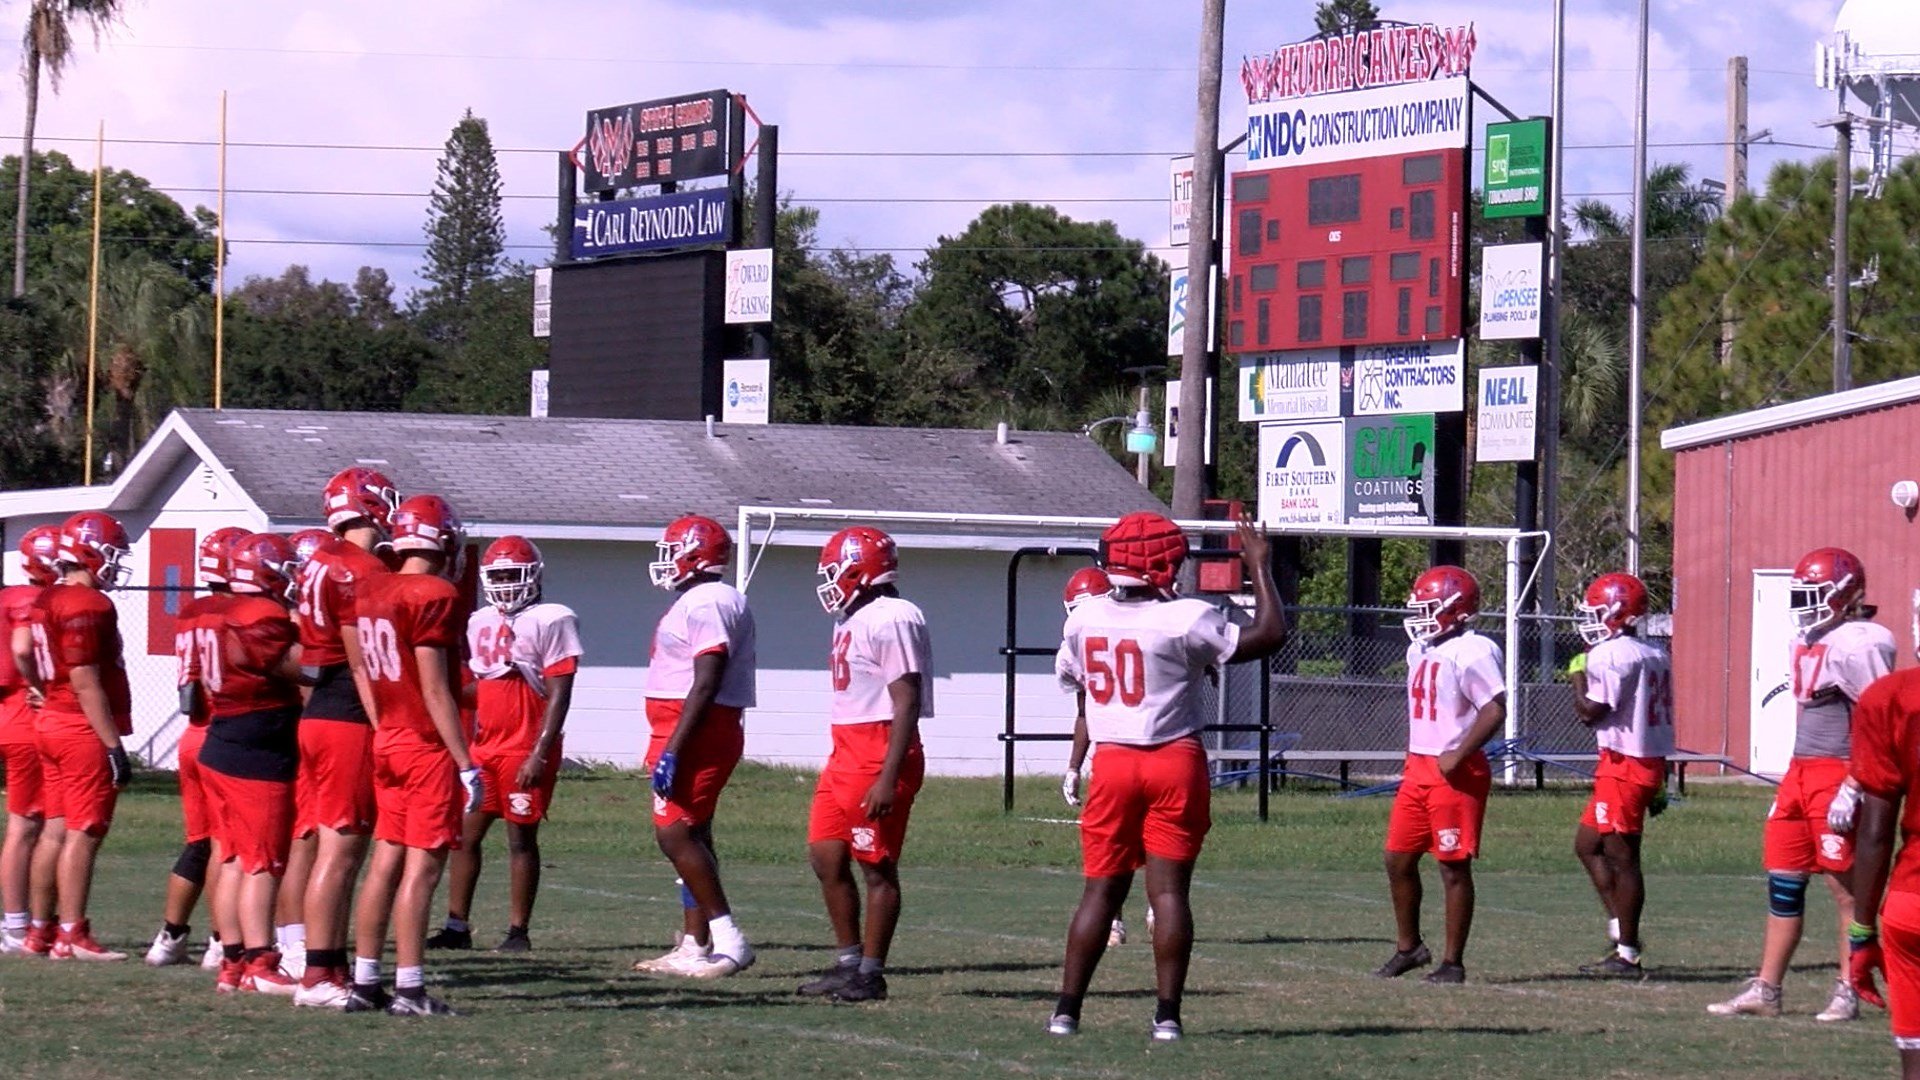 The Manatee Hurricanes (4-0) host Port Charlotte (2-2), Friday at 7:30pm.